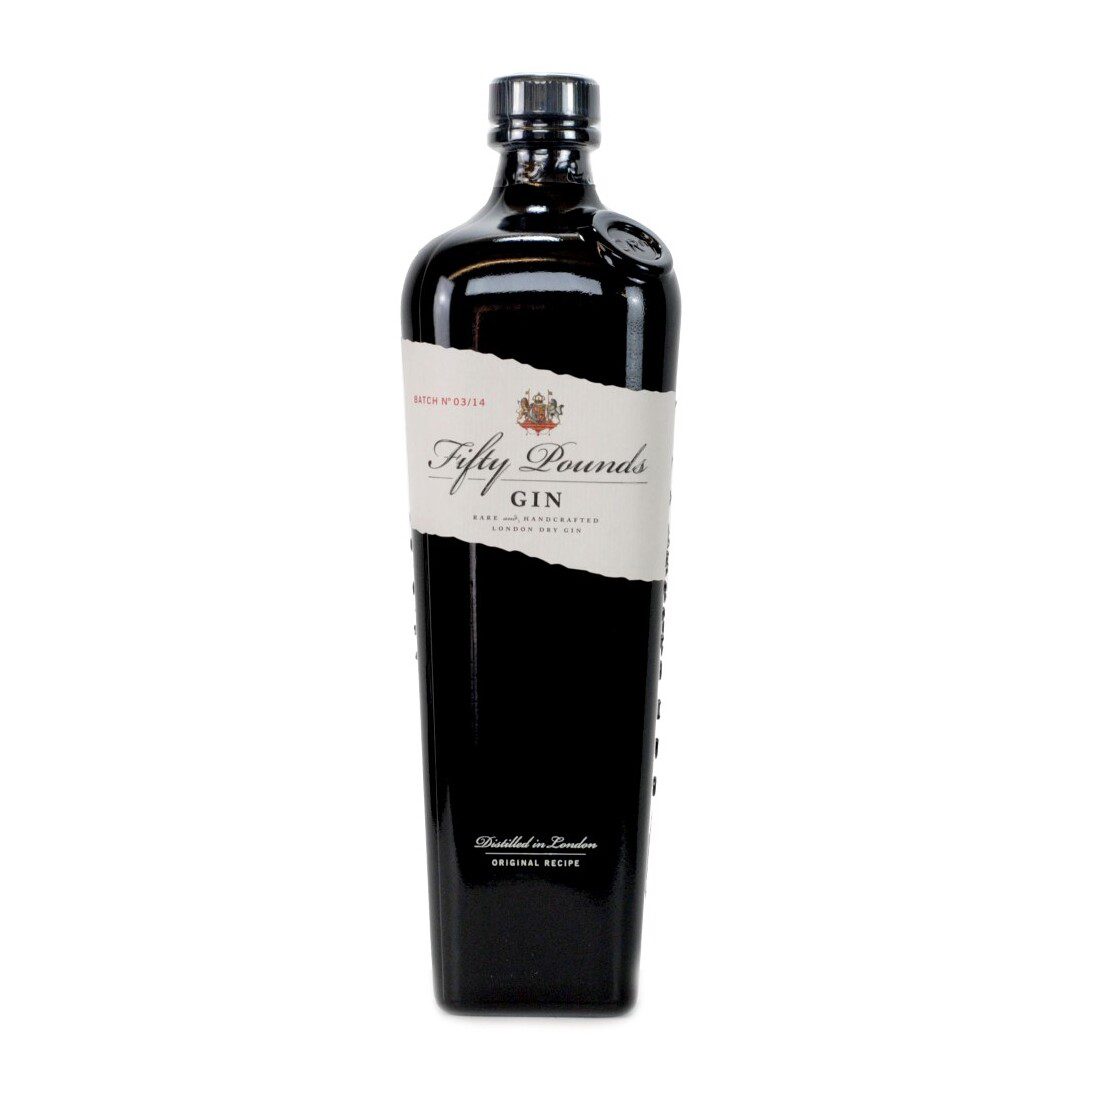 Fifty Pounds London Dry Gin 43.5%